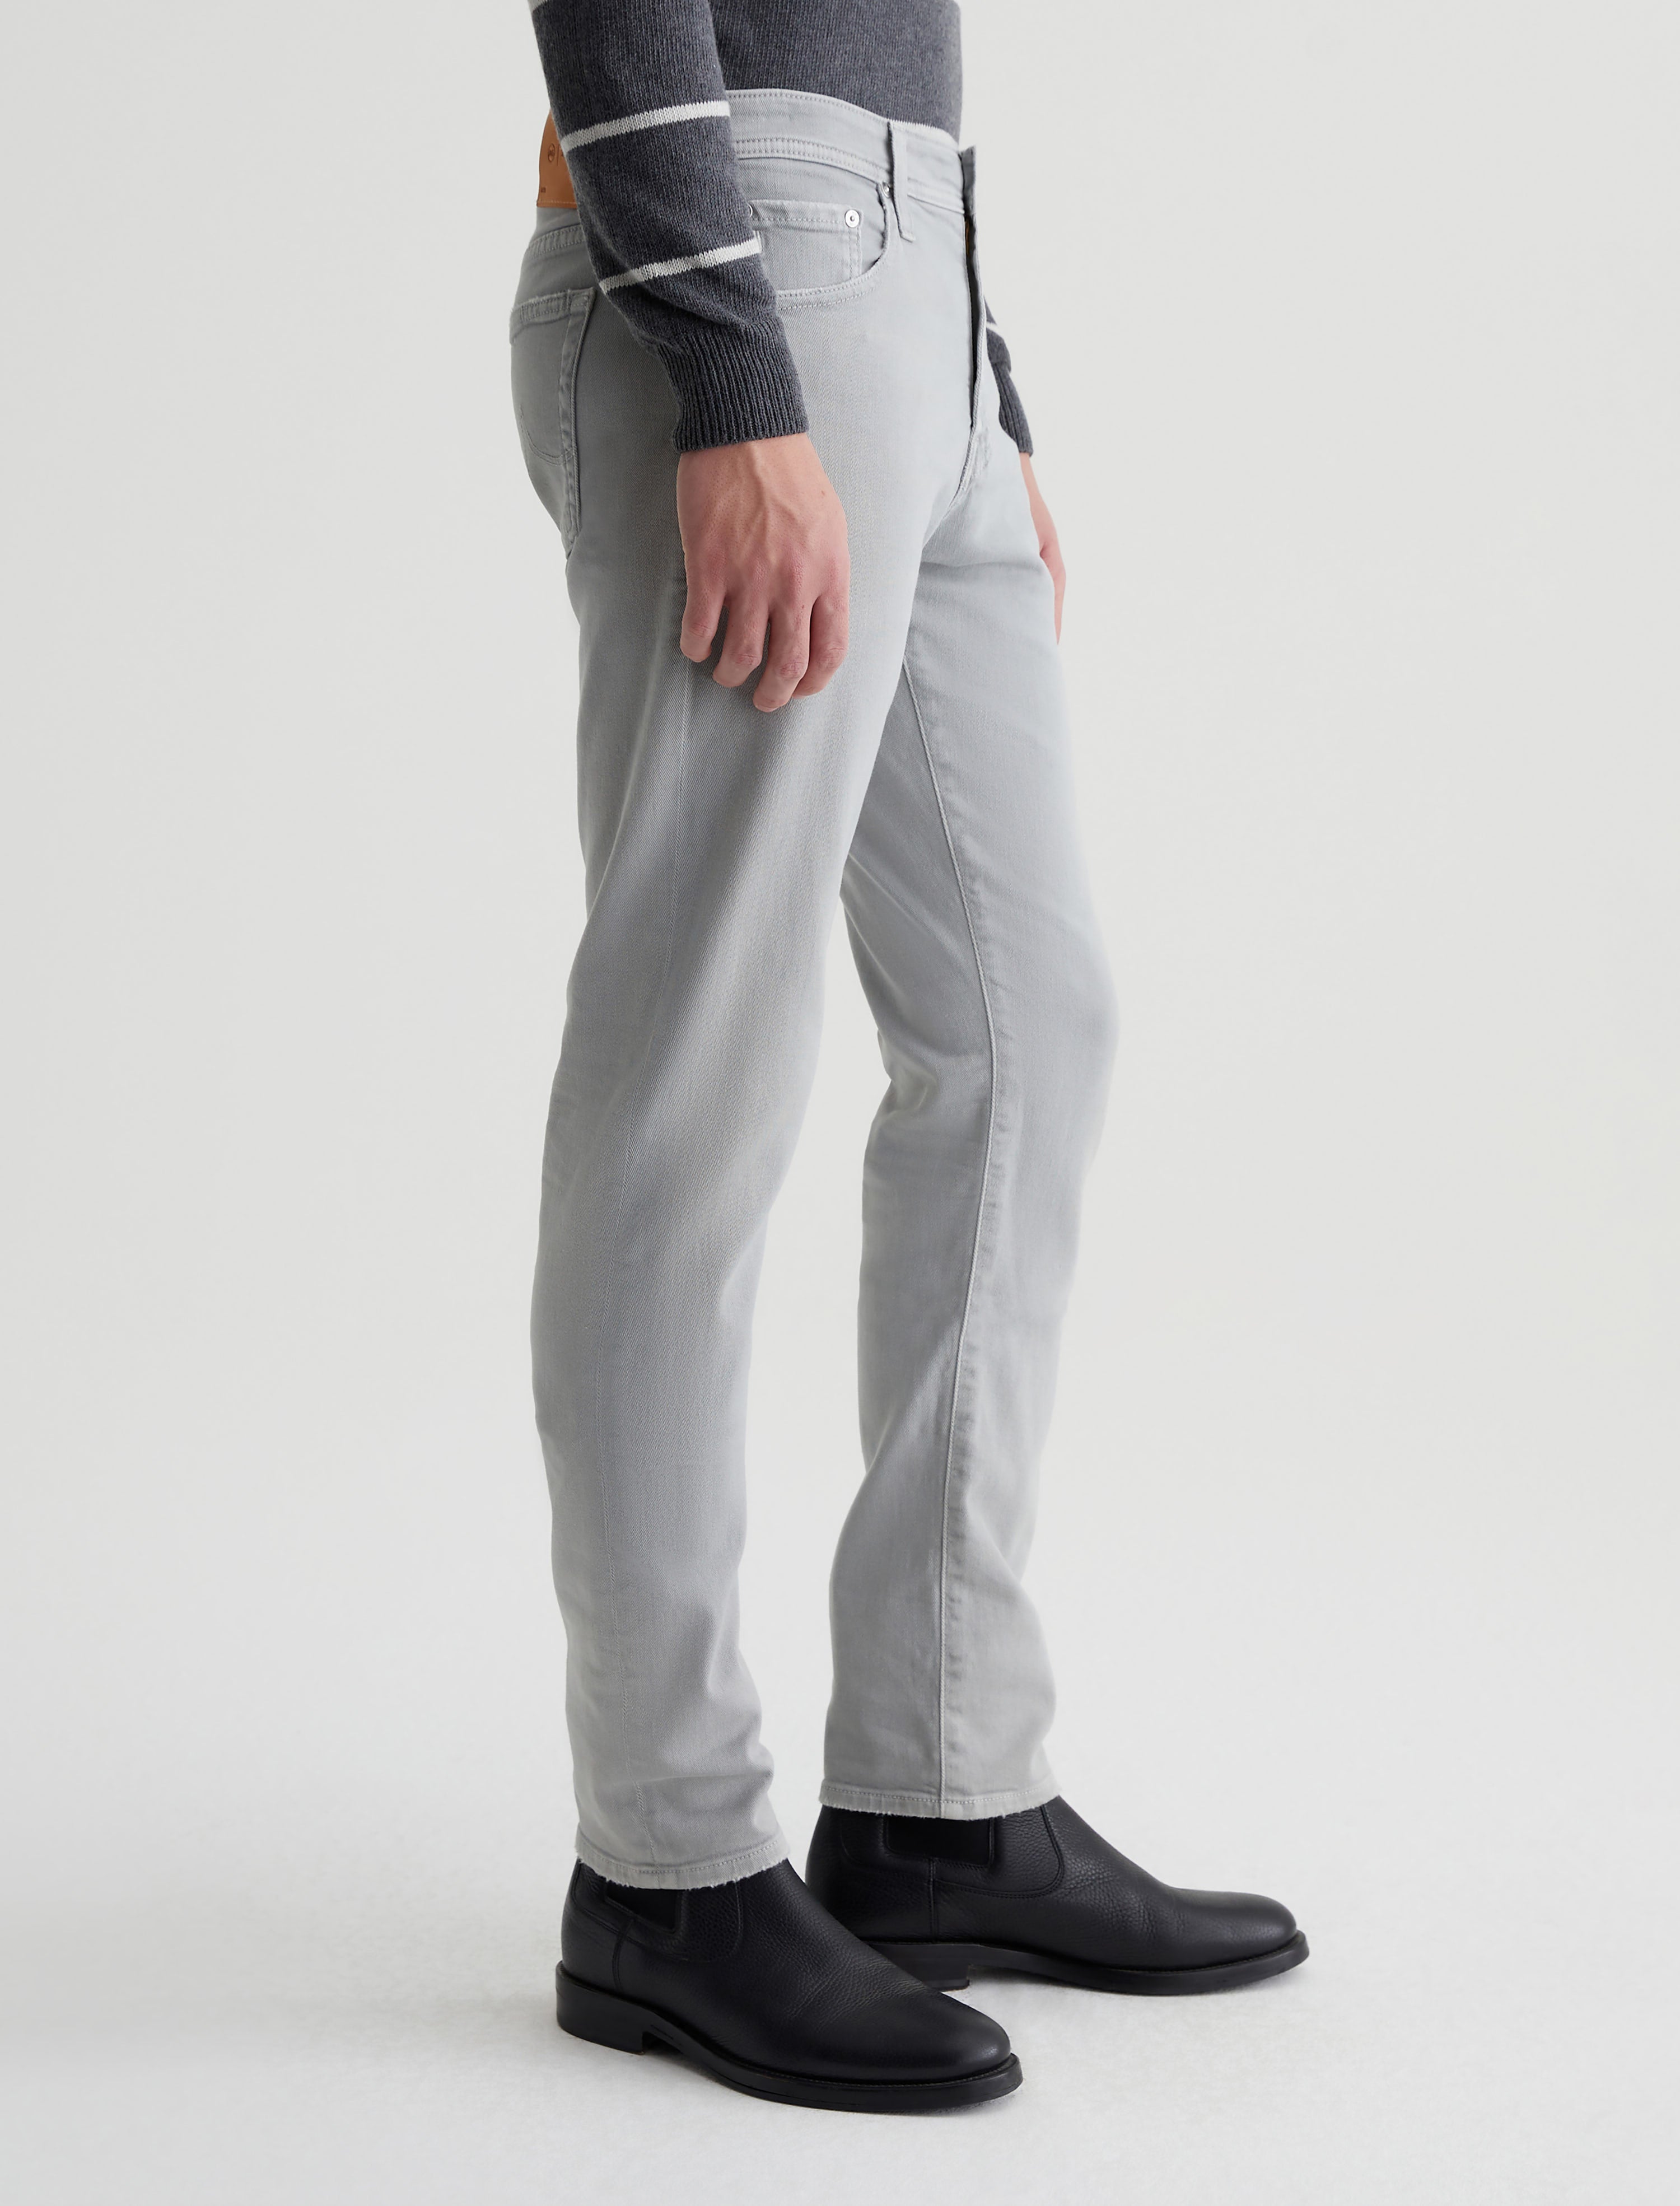 Men Tellis 7 Years Sulfur Aero Grey at AG Jeans Official Store